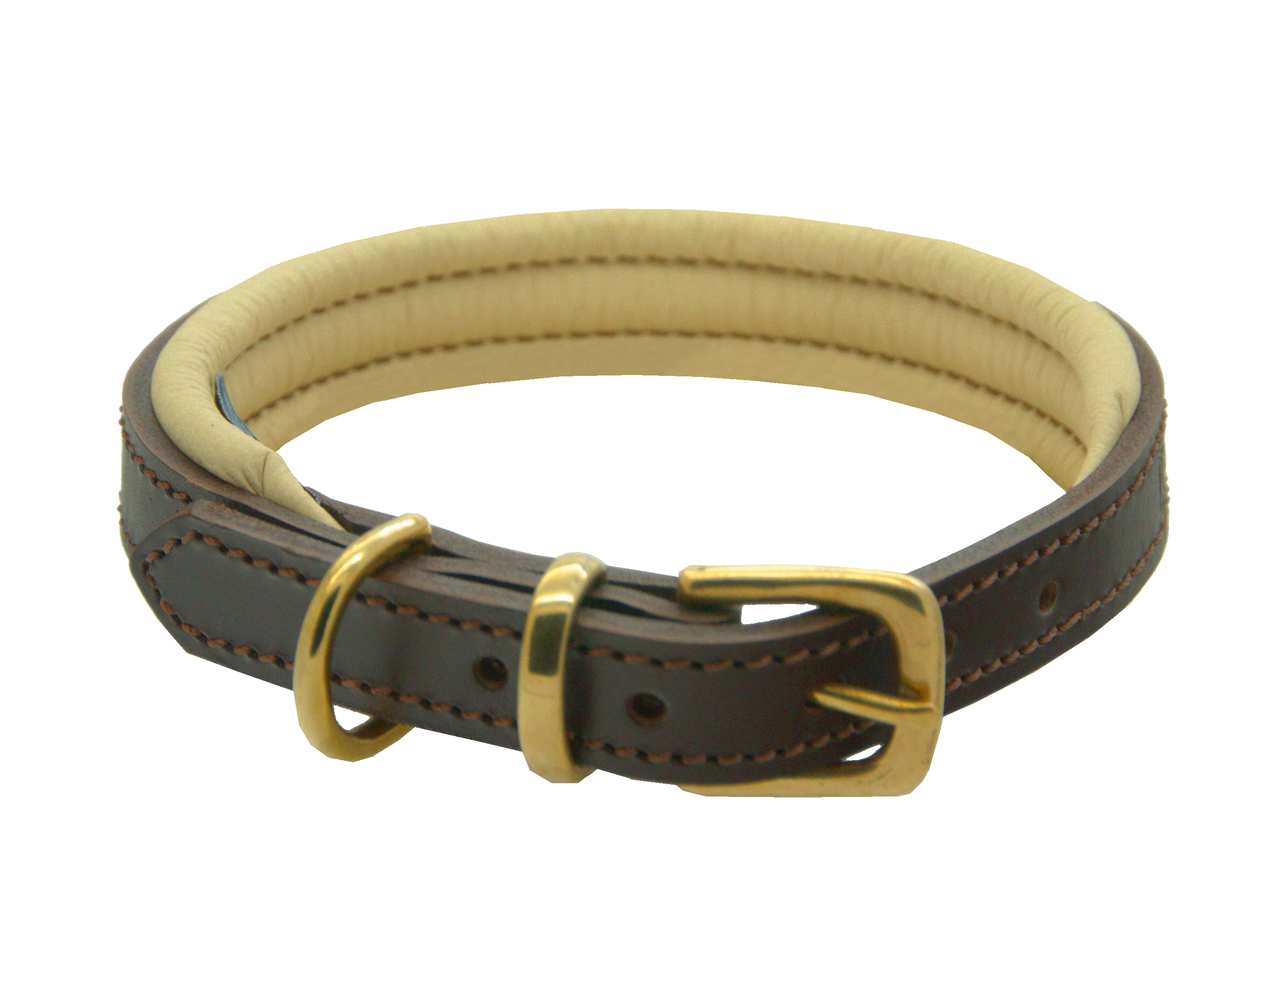 D&H Classic Colours Leather dog collar in brown and cream